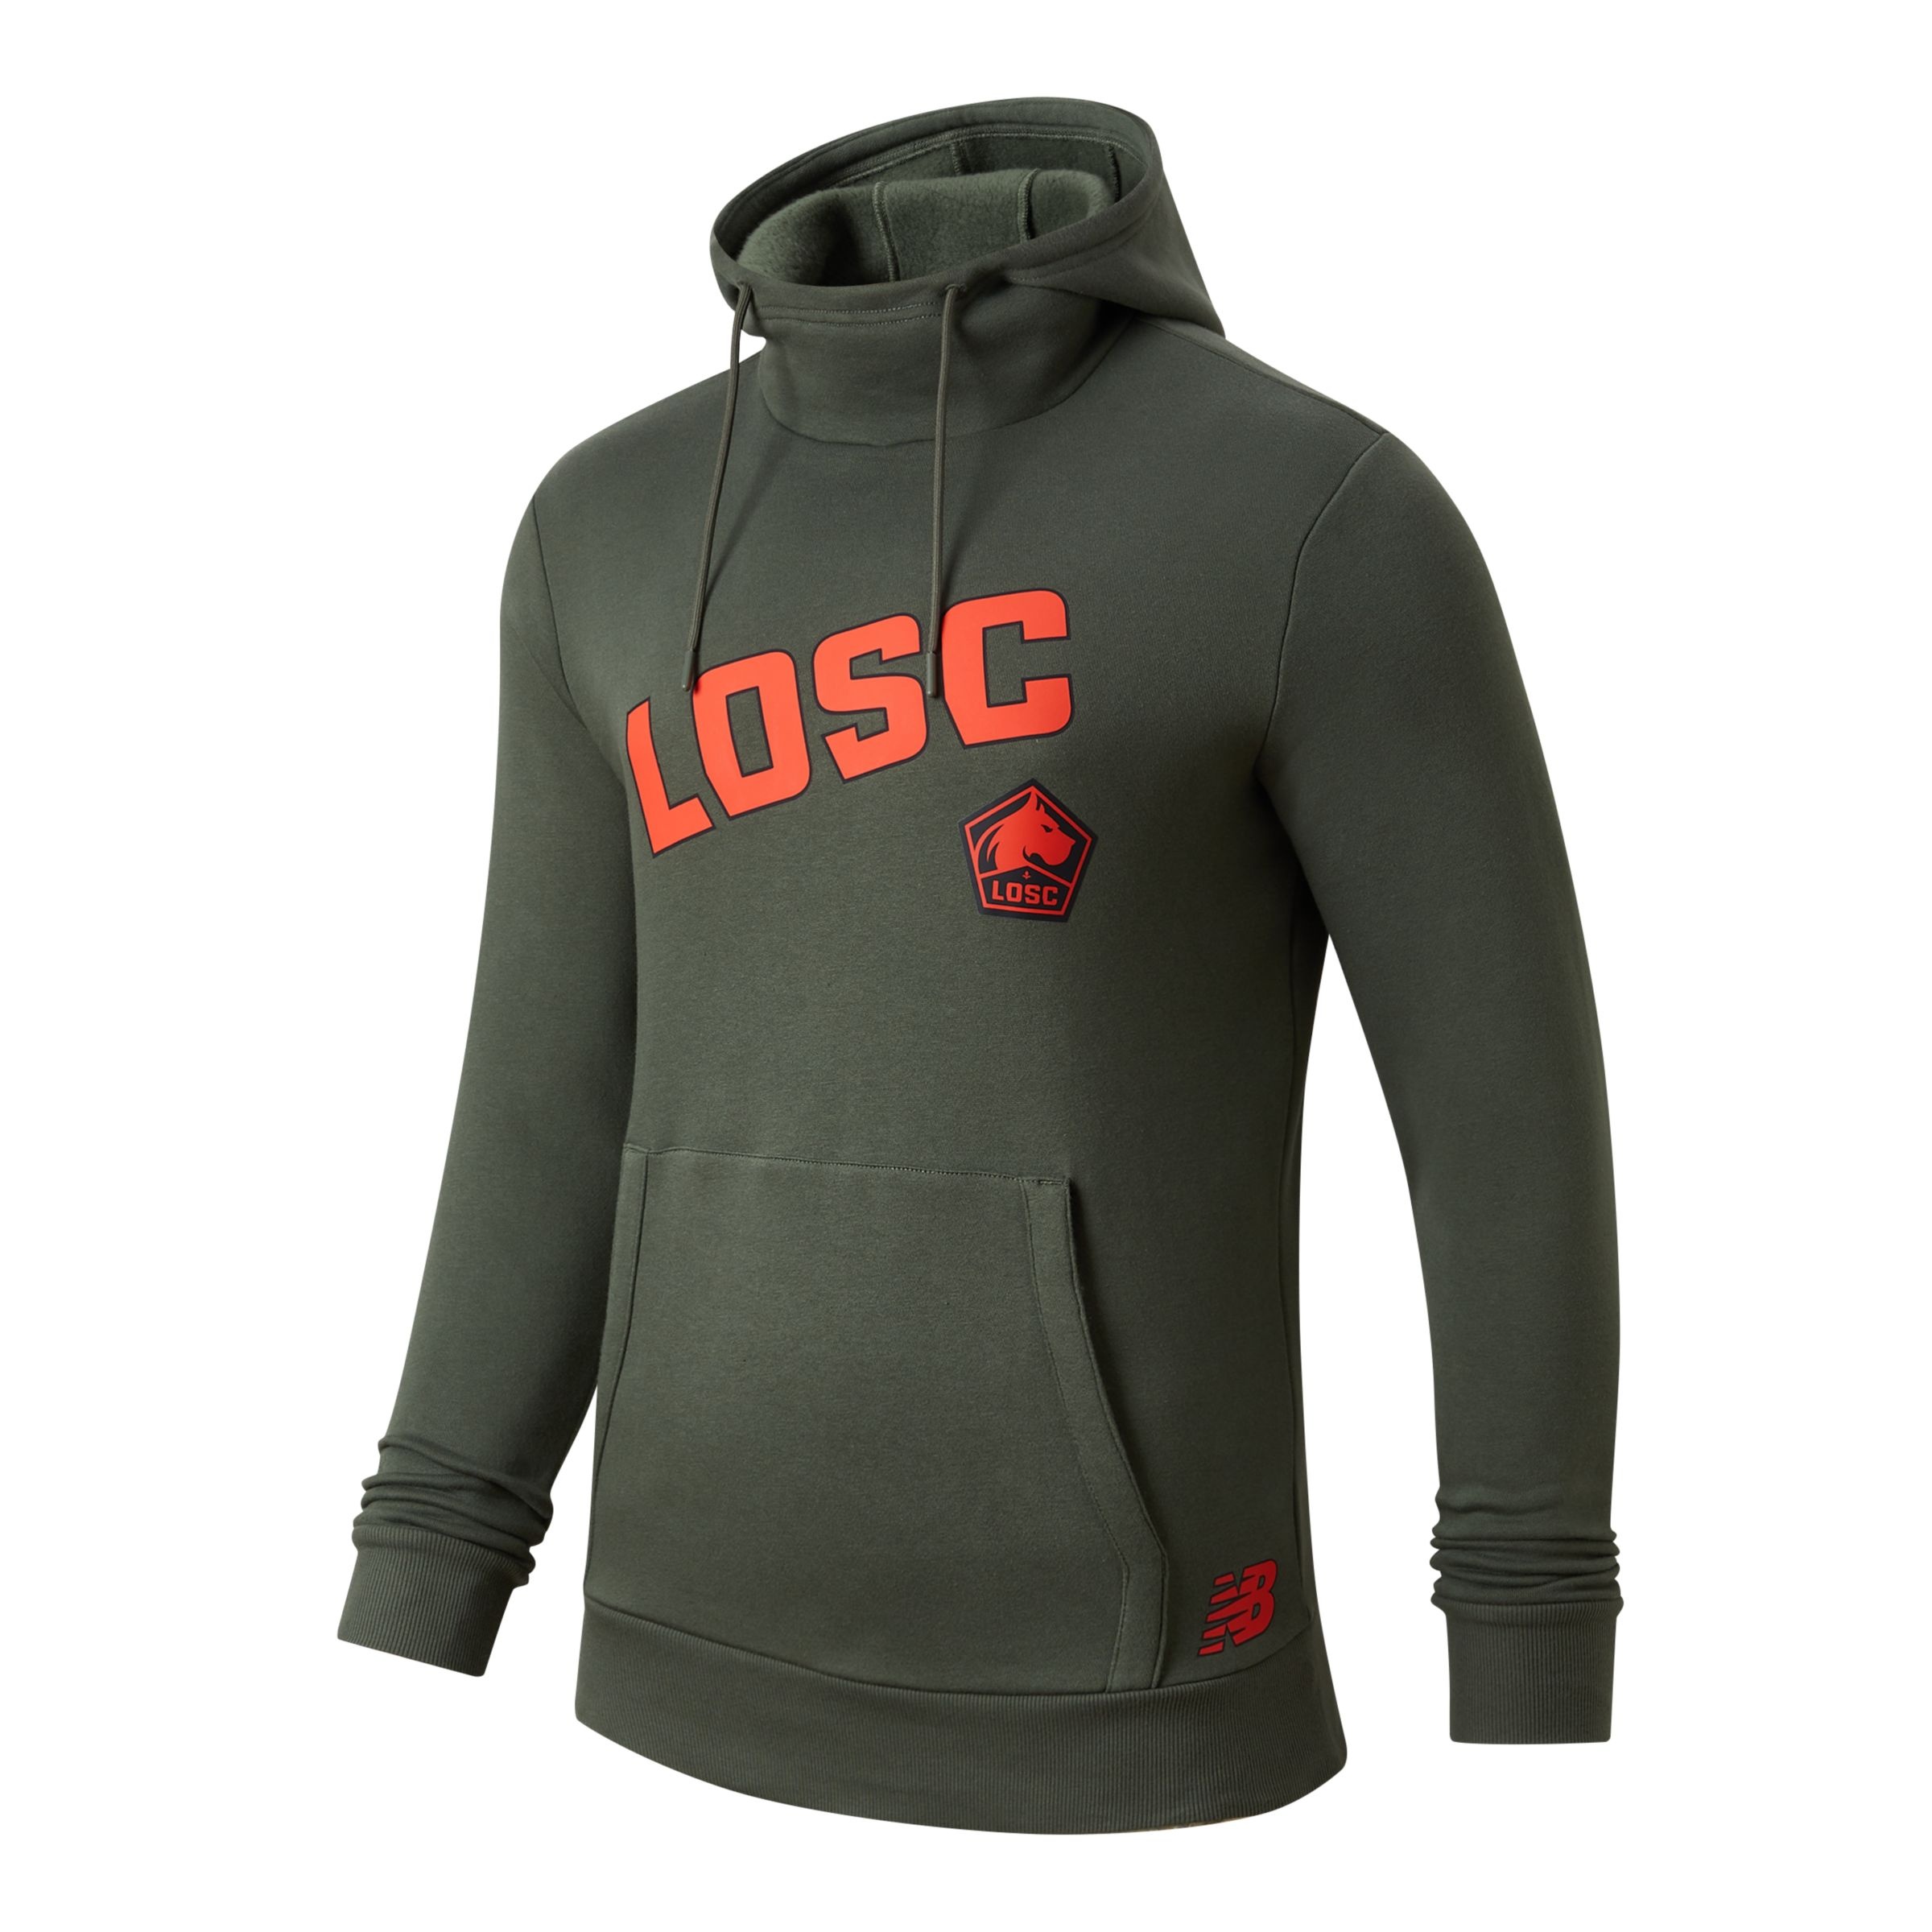 LOSC Lille Graphic Overhead Hoodie - 7